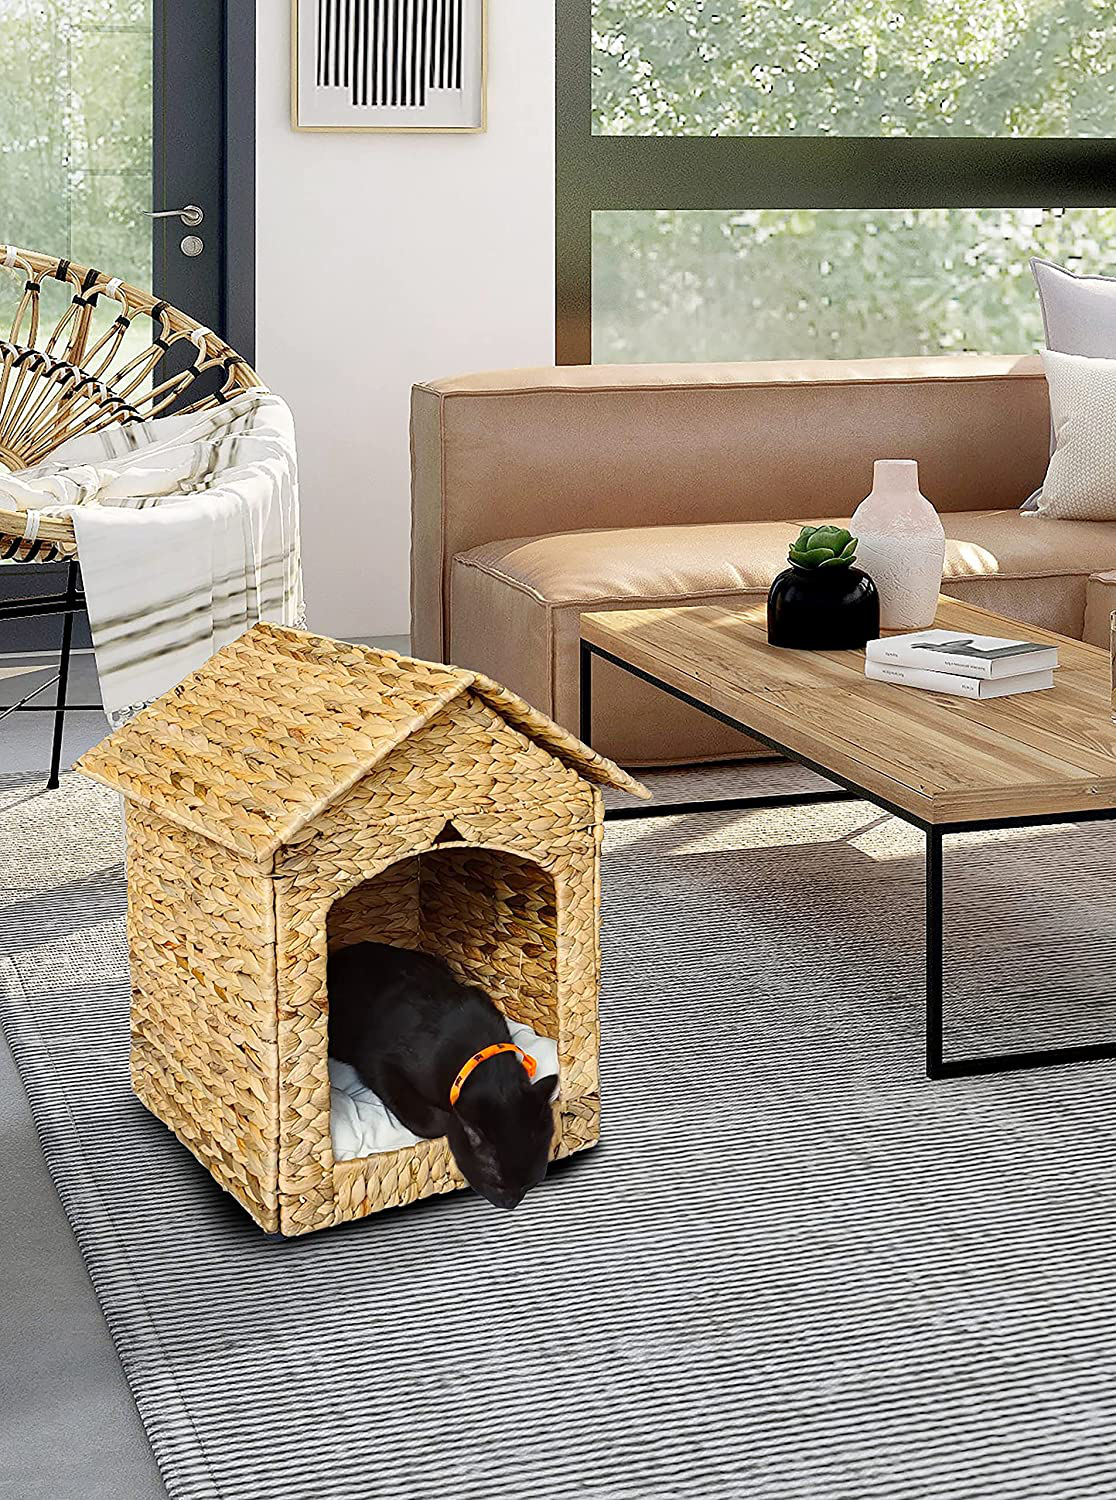 B.U.STYLE Ecofriendly Pet House Indoor, Foldable Puppy Bed, Cat Dog Housewater Hyacinth House for Indoor Used, and Natural Soft Cushion, Natural Color, 16.1Inl X 15.7W X 18.9Hin